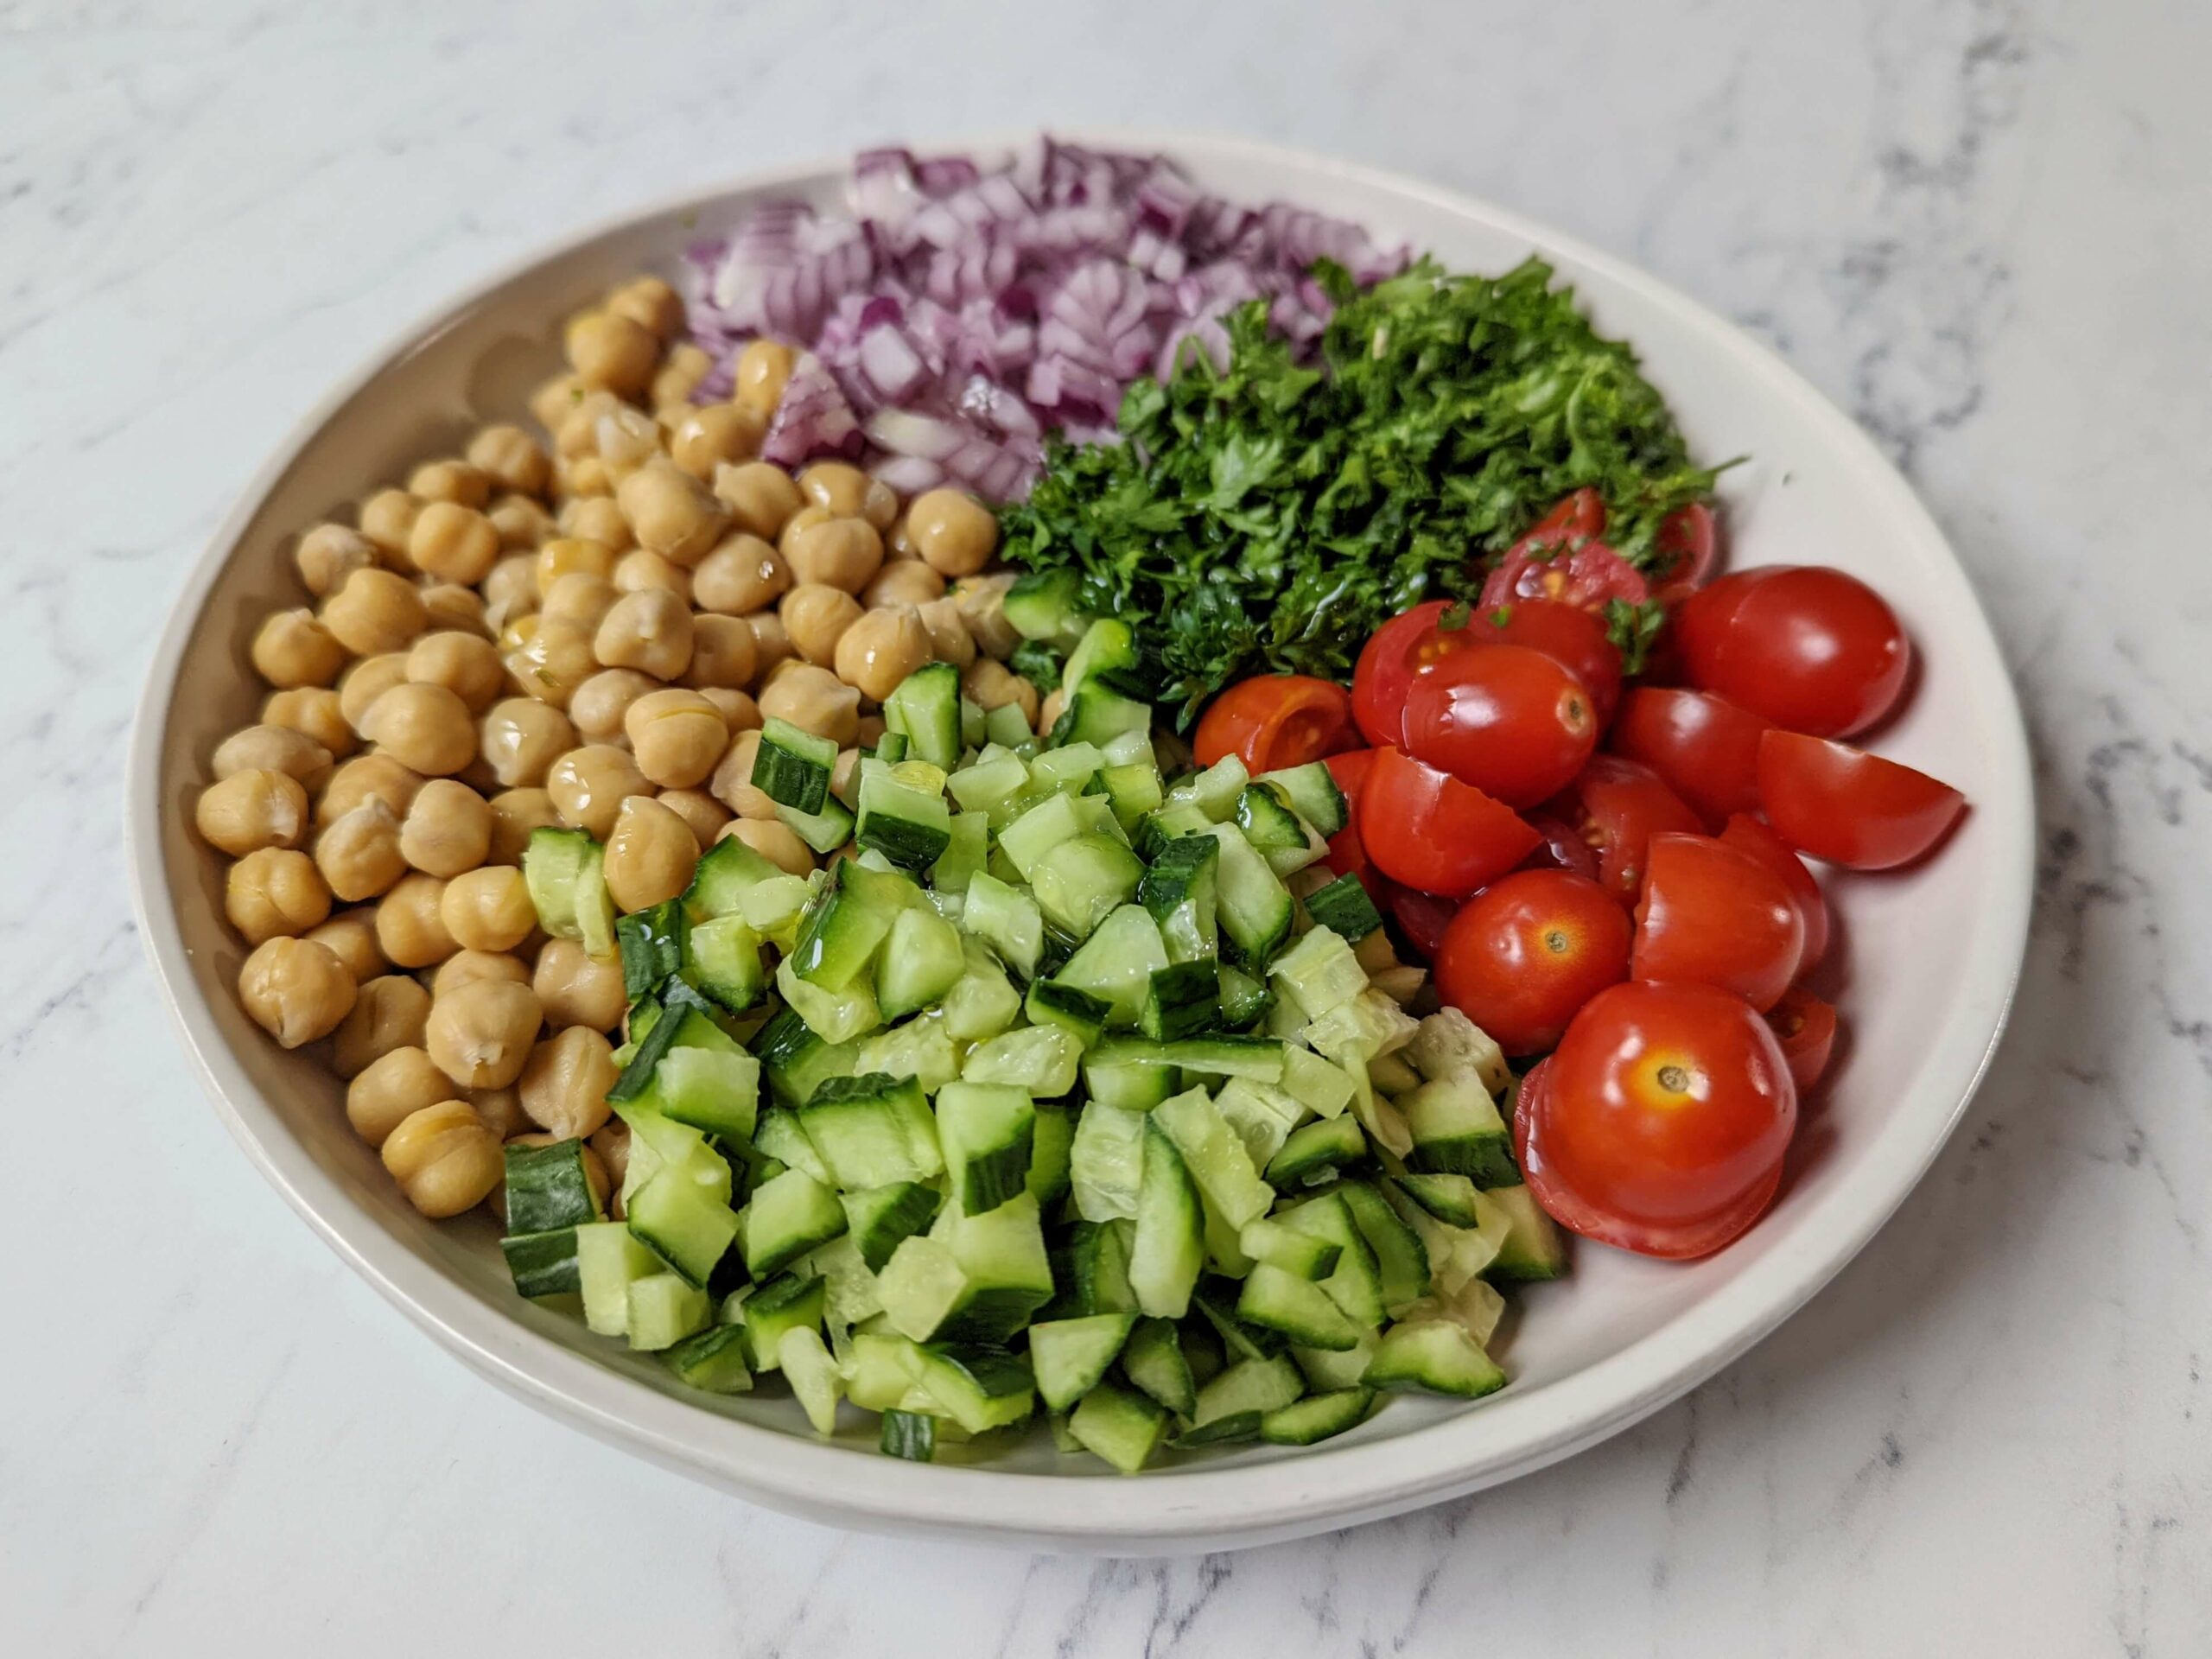 Add the vegetables for chickpea salad on a plate.